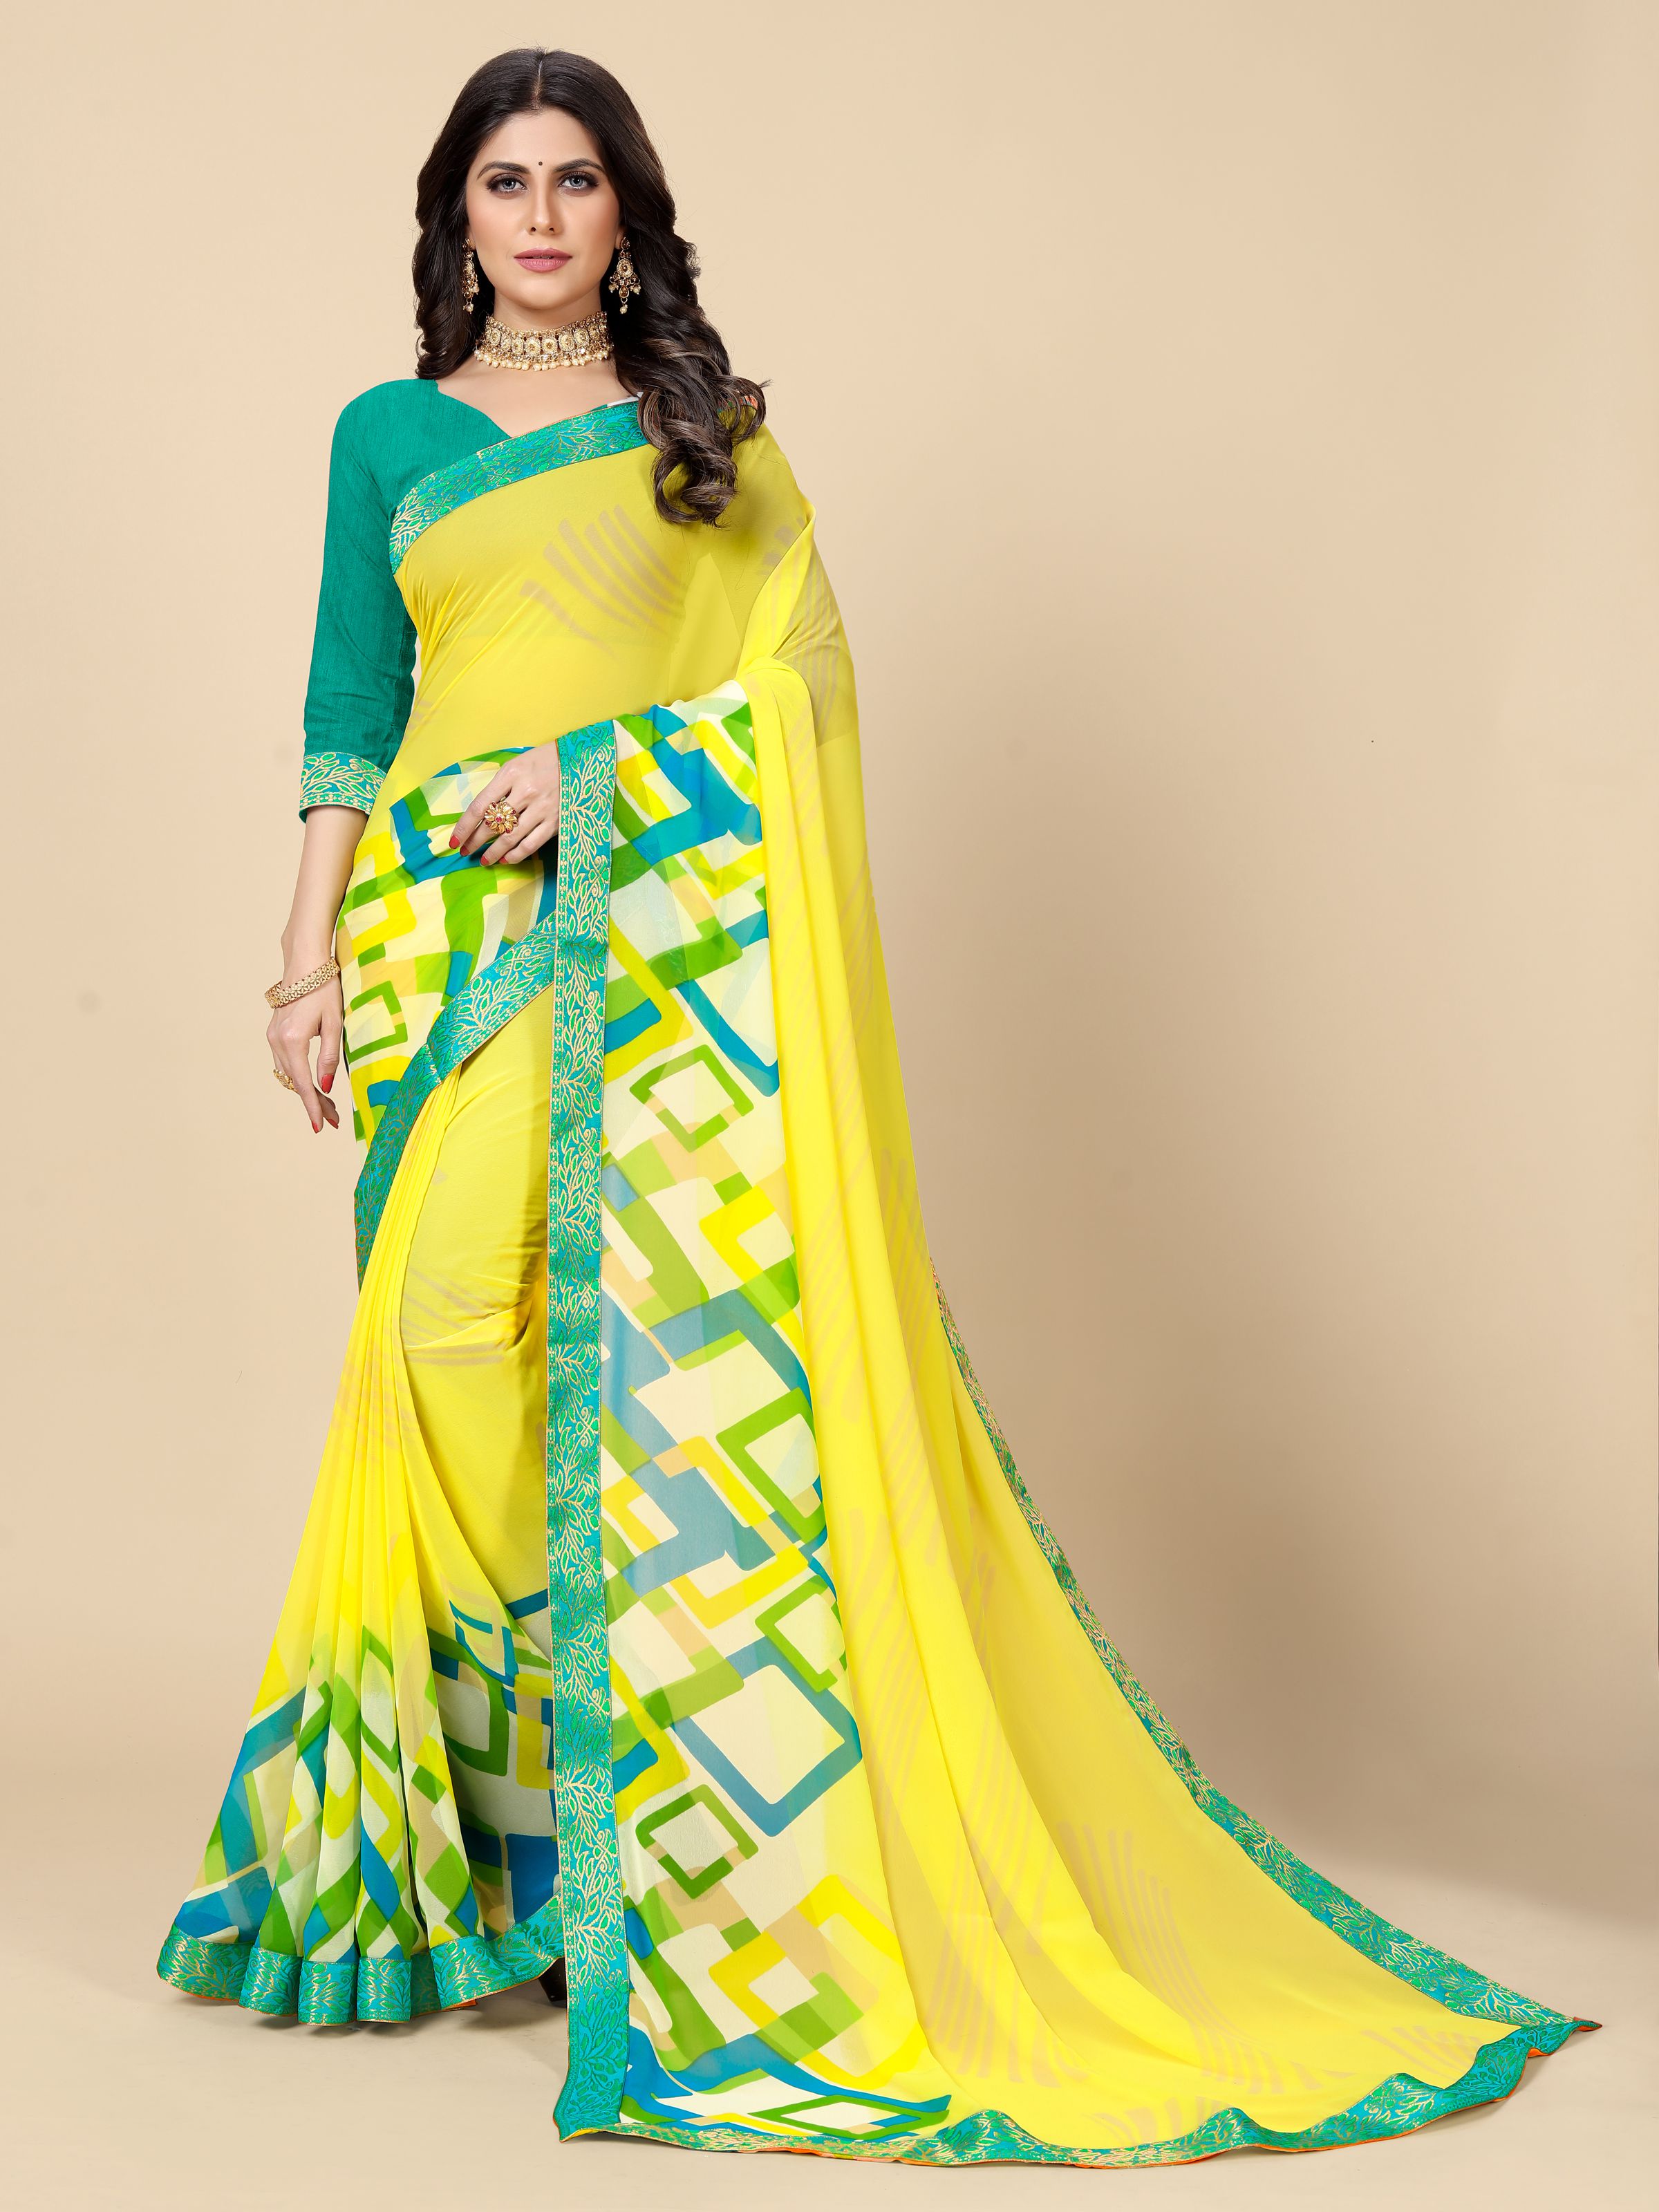 Rangita Women Abstract Printed Georgette Saree With Blouse Piece - Yellow